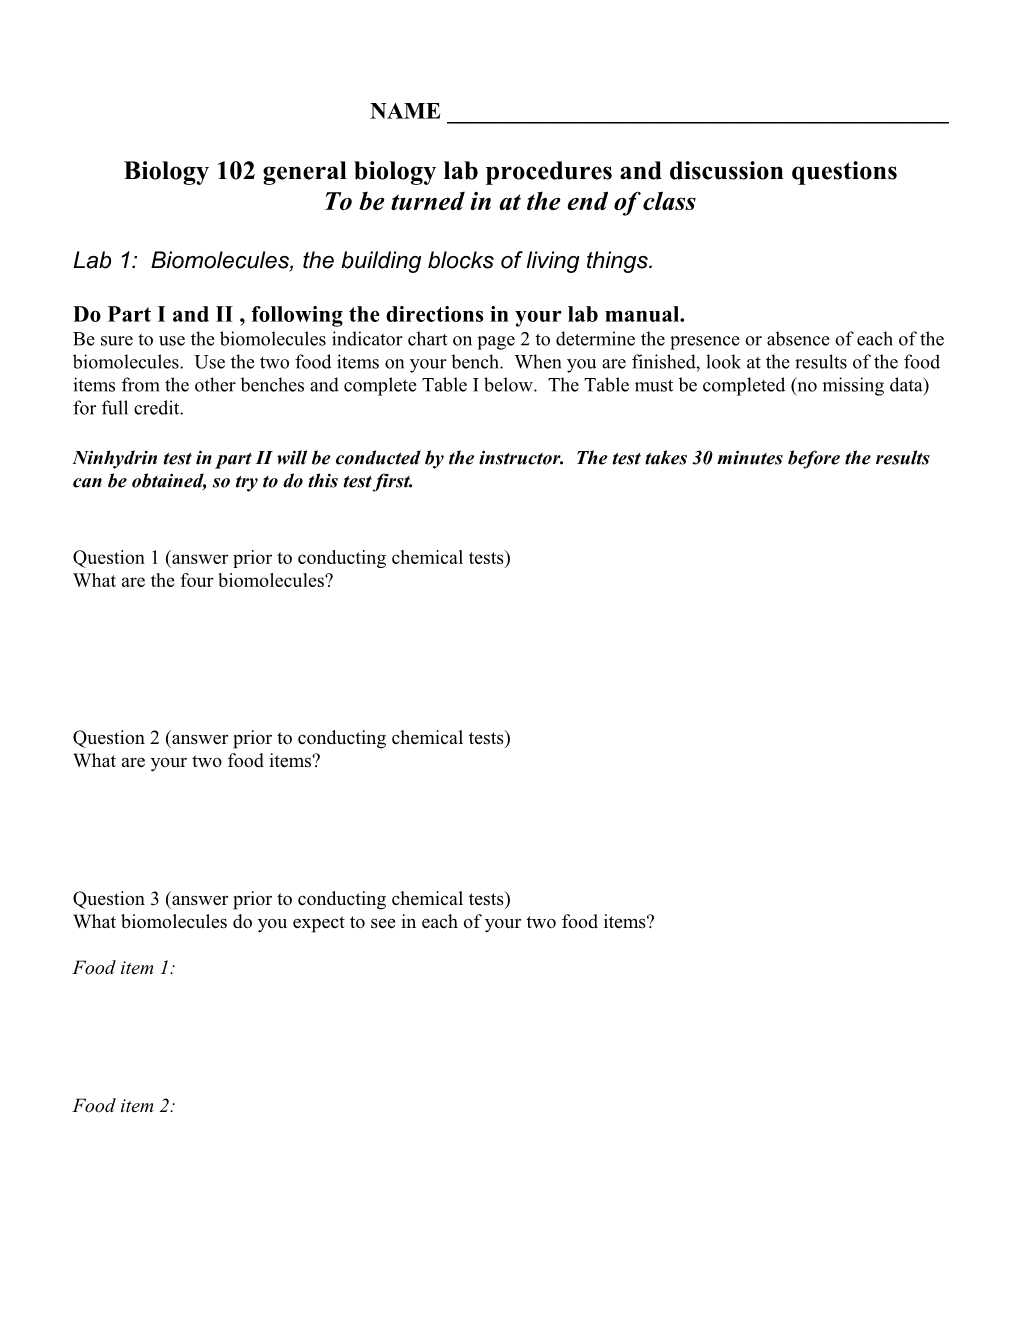 Biology 102 General Biology Lab Procedures and Discussion Questions